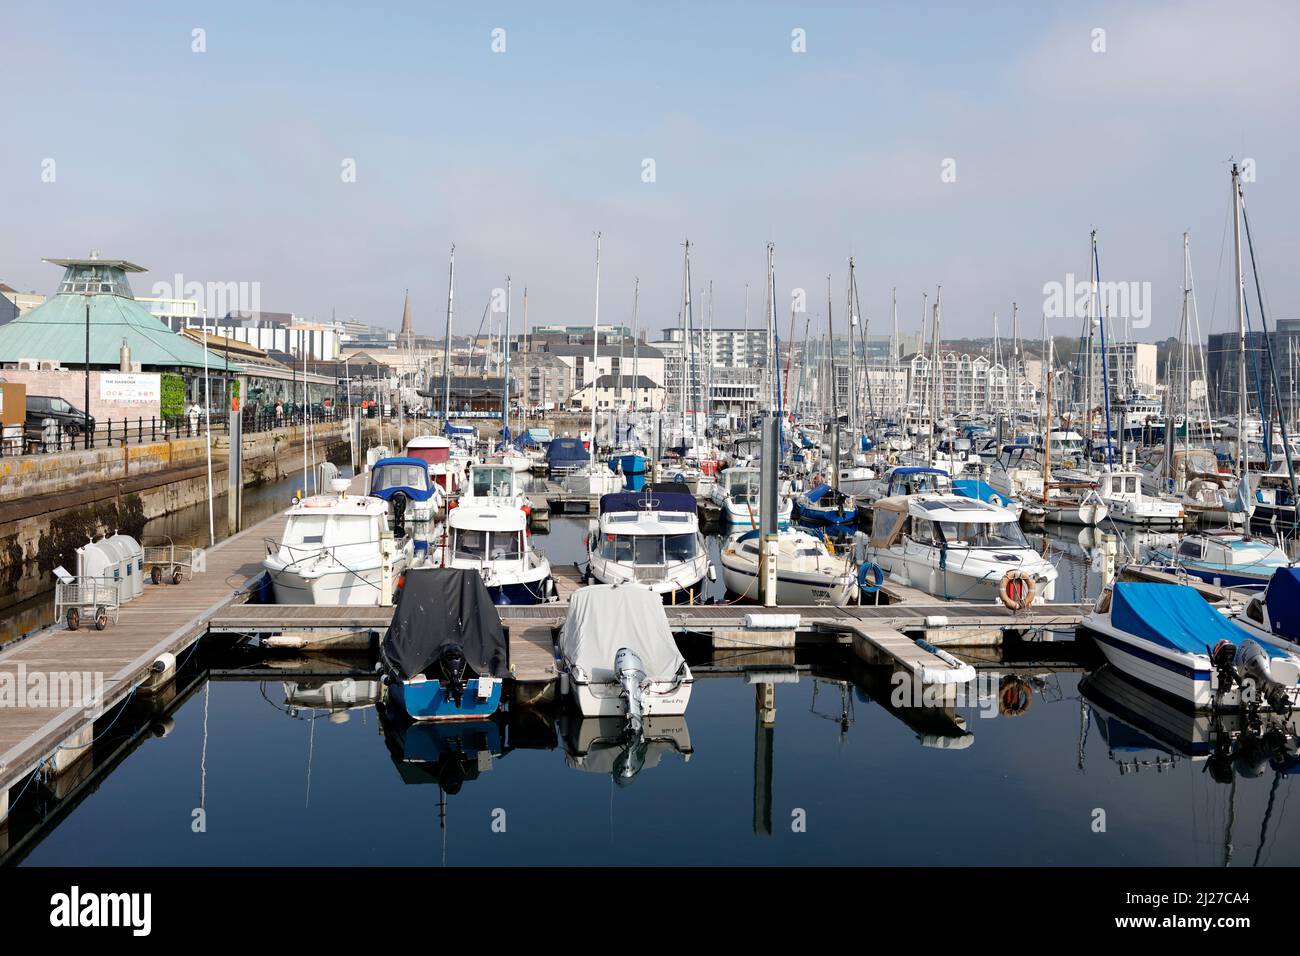 Plymouth, Devon, UK. 30th March, 2022. A sunny spring day in the Barbican in Plymouth.  The Barbican is a popular tourist area with many Marinas. Stock Photo